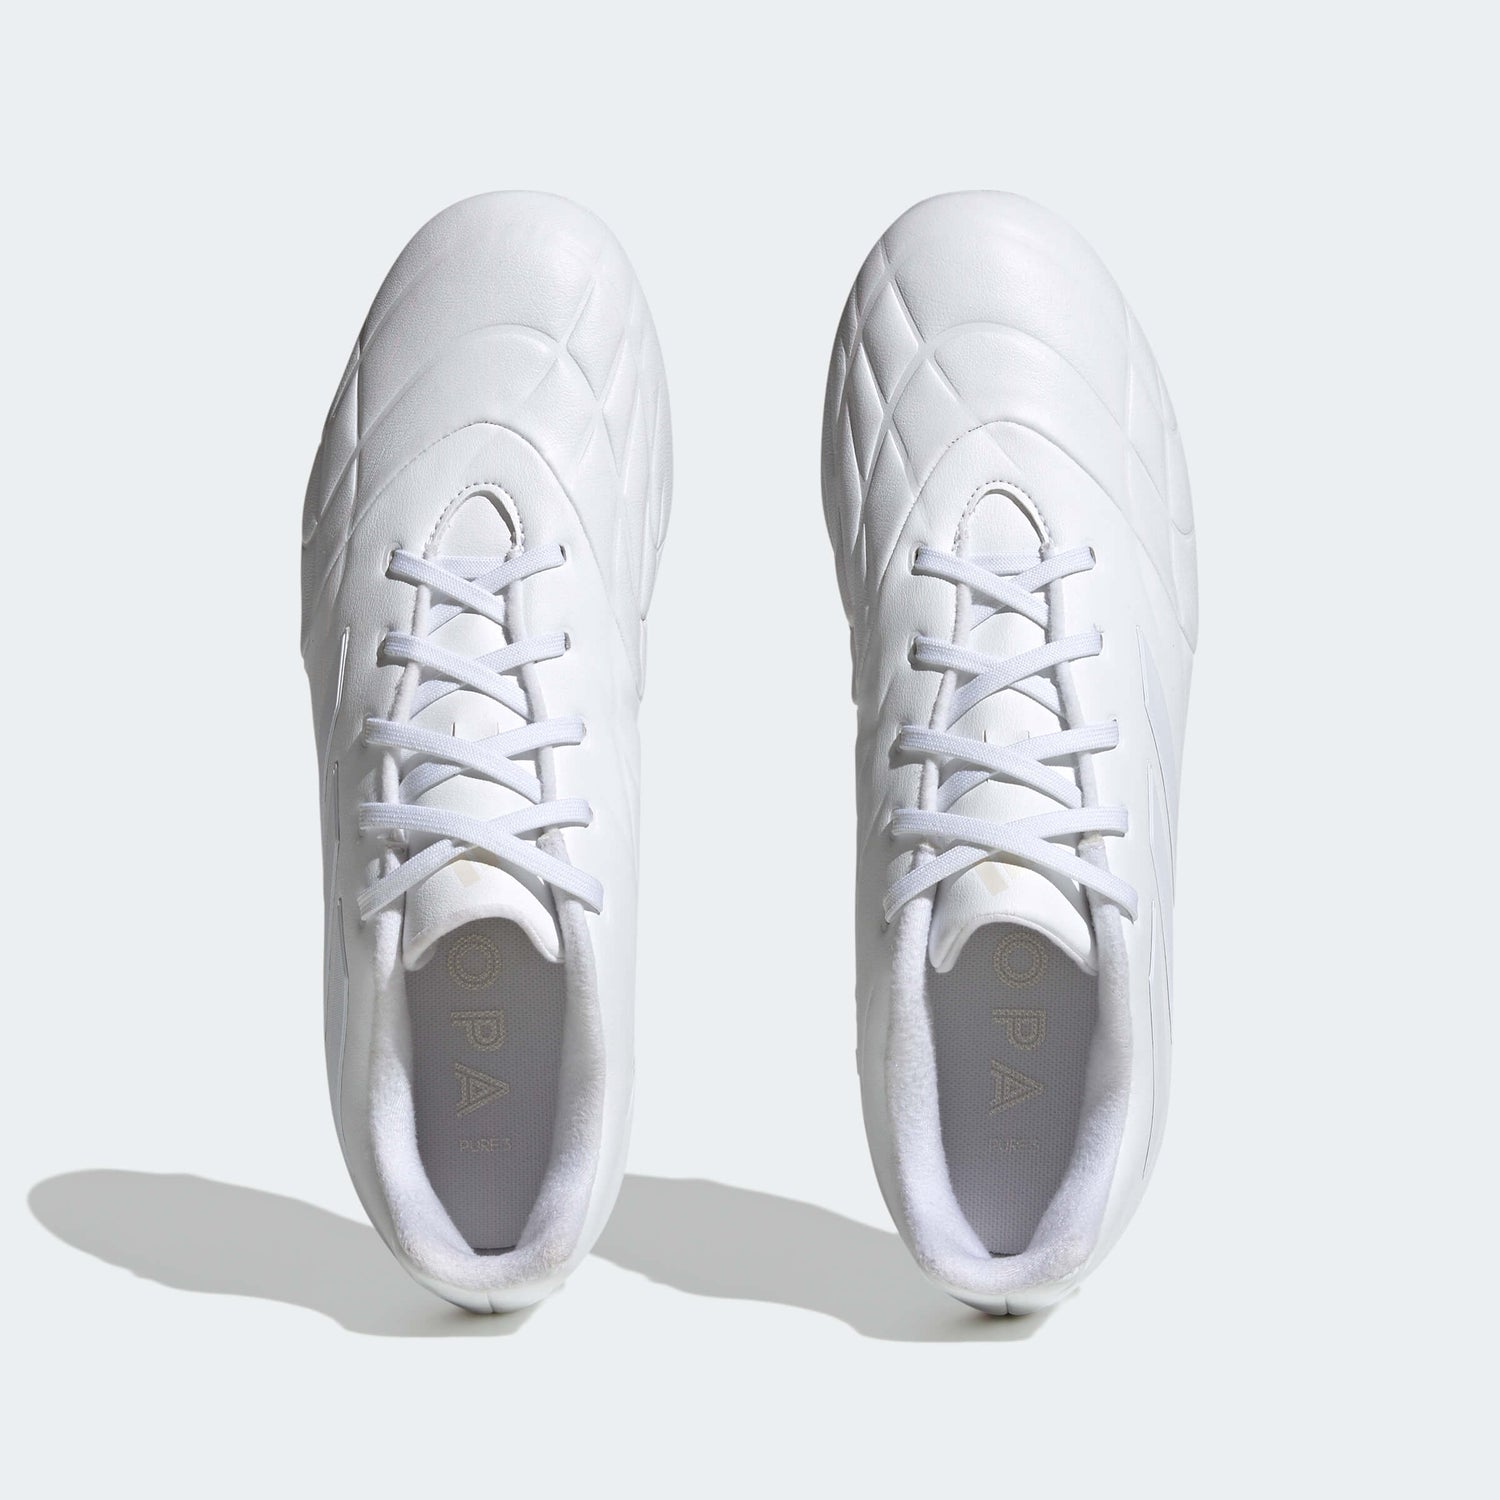 adidas Copa Pure.3 FG - Pearlized Pack (SP23) (Pair - Top)